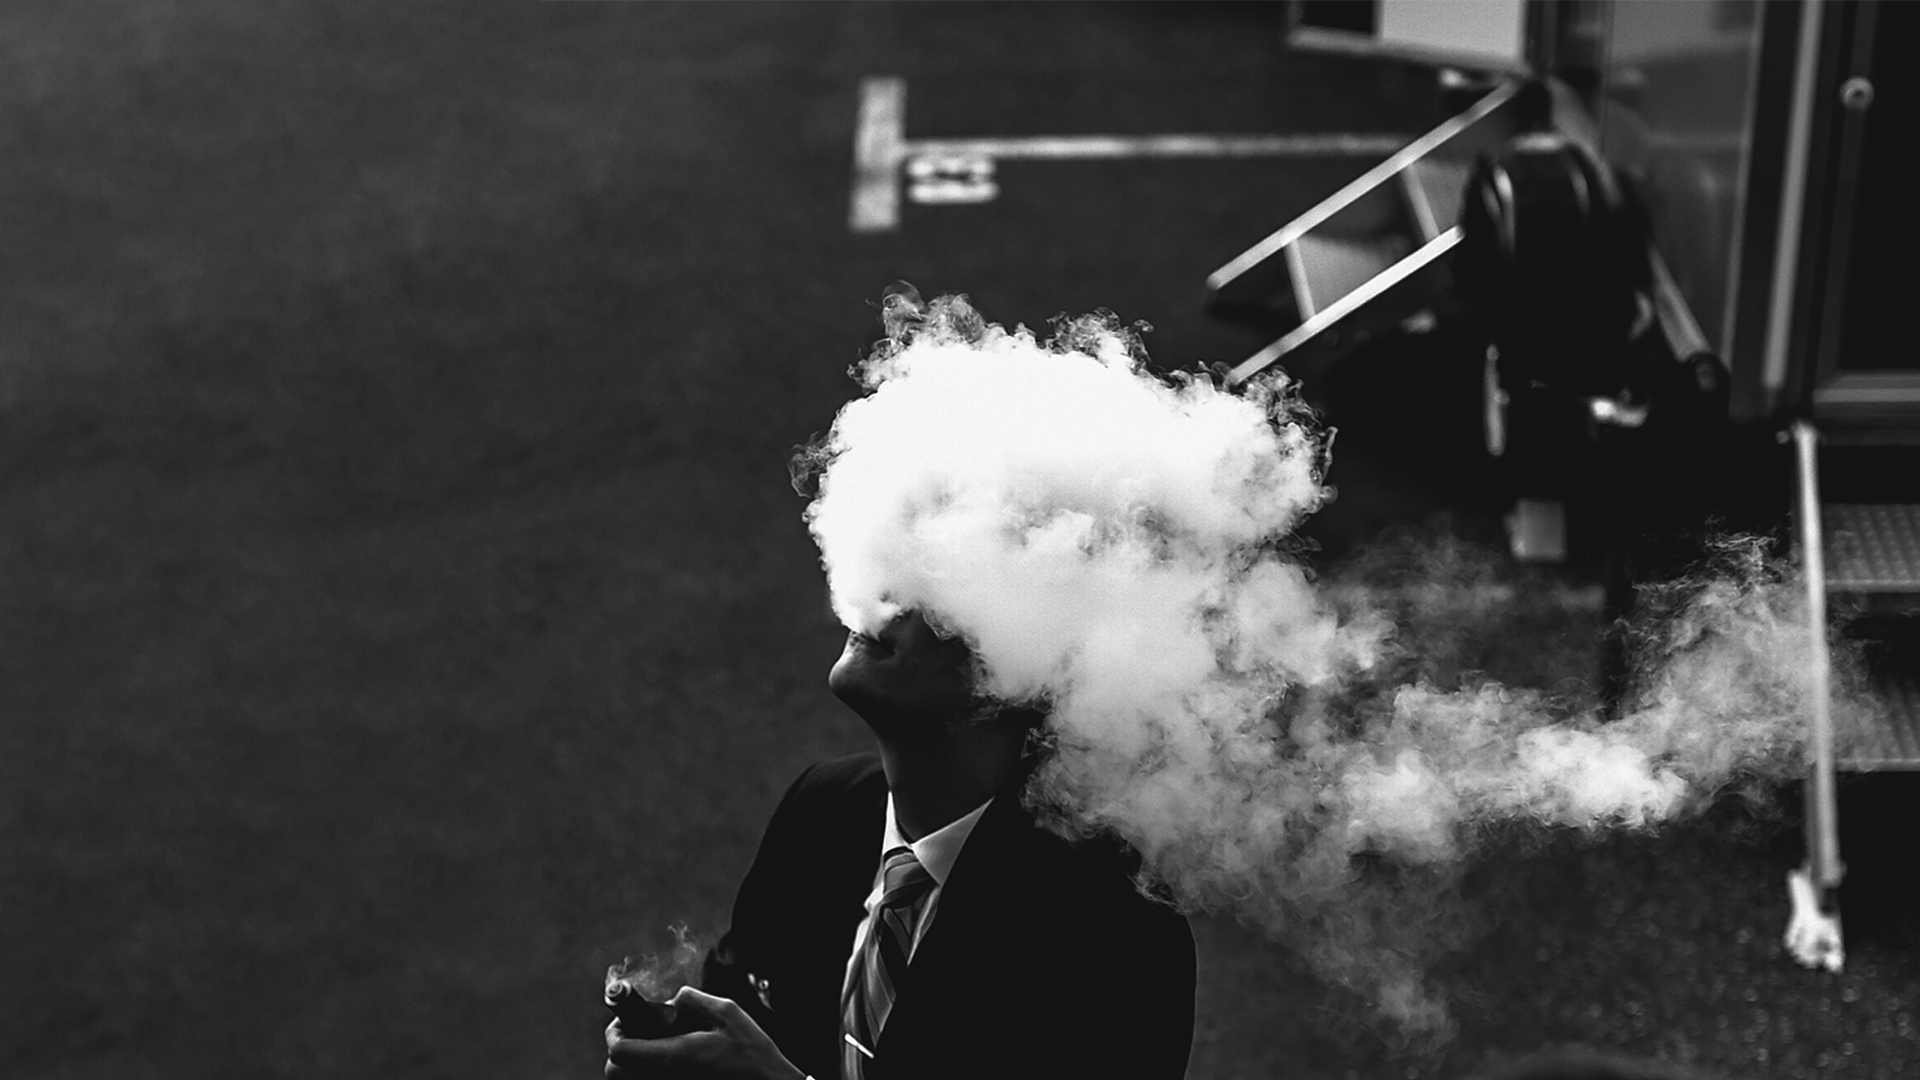 A student in school uniform vaping with an e-cigarette, in black and white